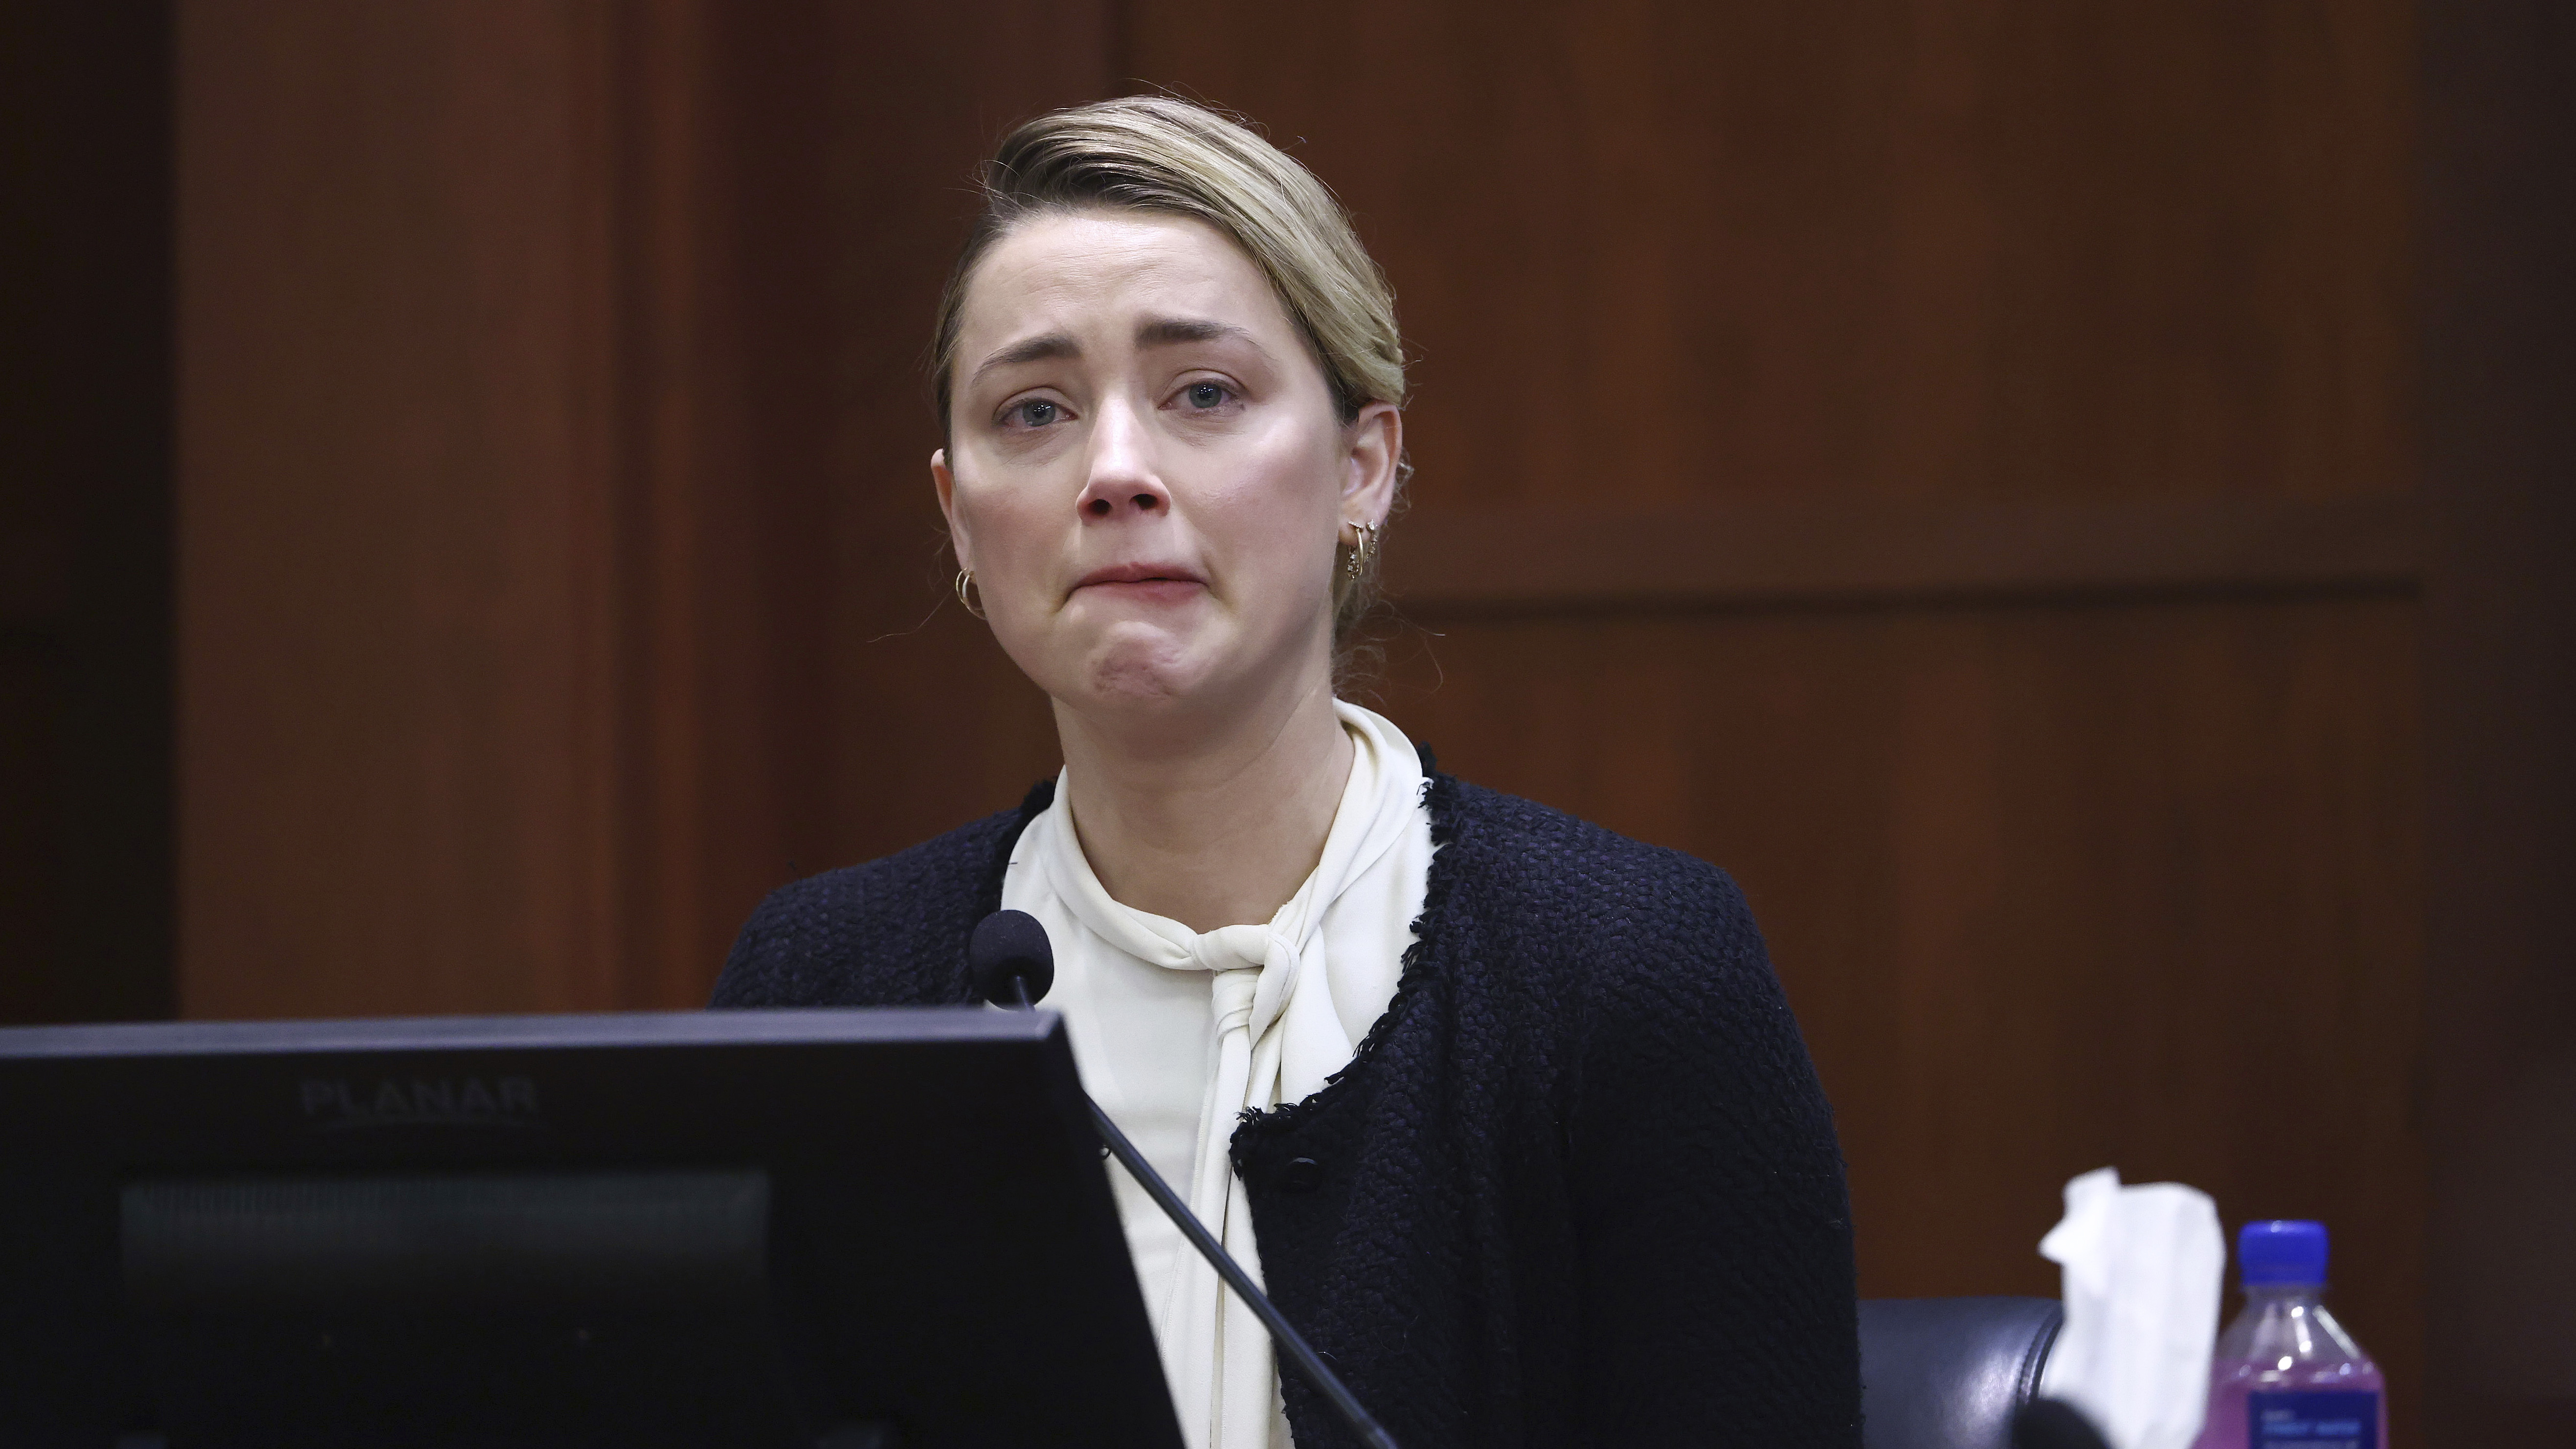 US actress Amber Heard reacts on the stand during the 50 million US dollar Depp vs Heard defamation trial at the Fairfax County Circuit Court in Fairfax, Virginia, USA, 05 May 2022. 